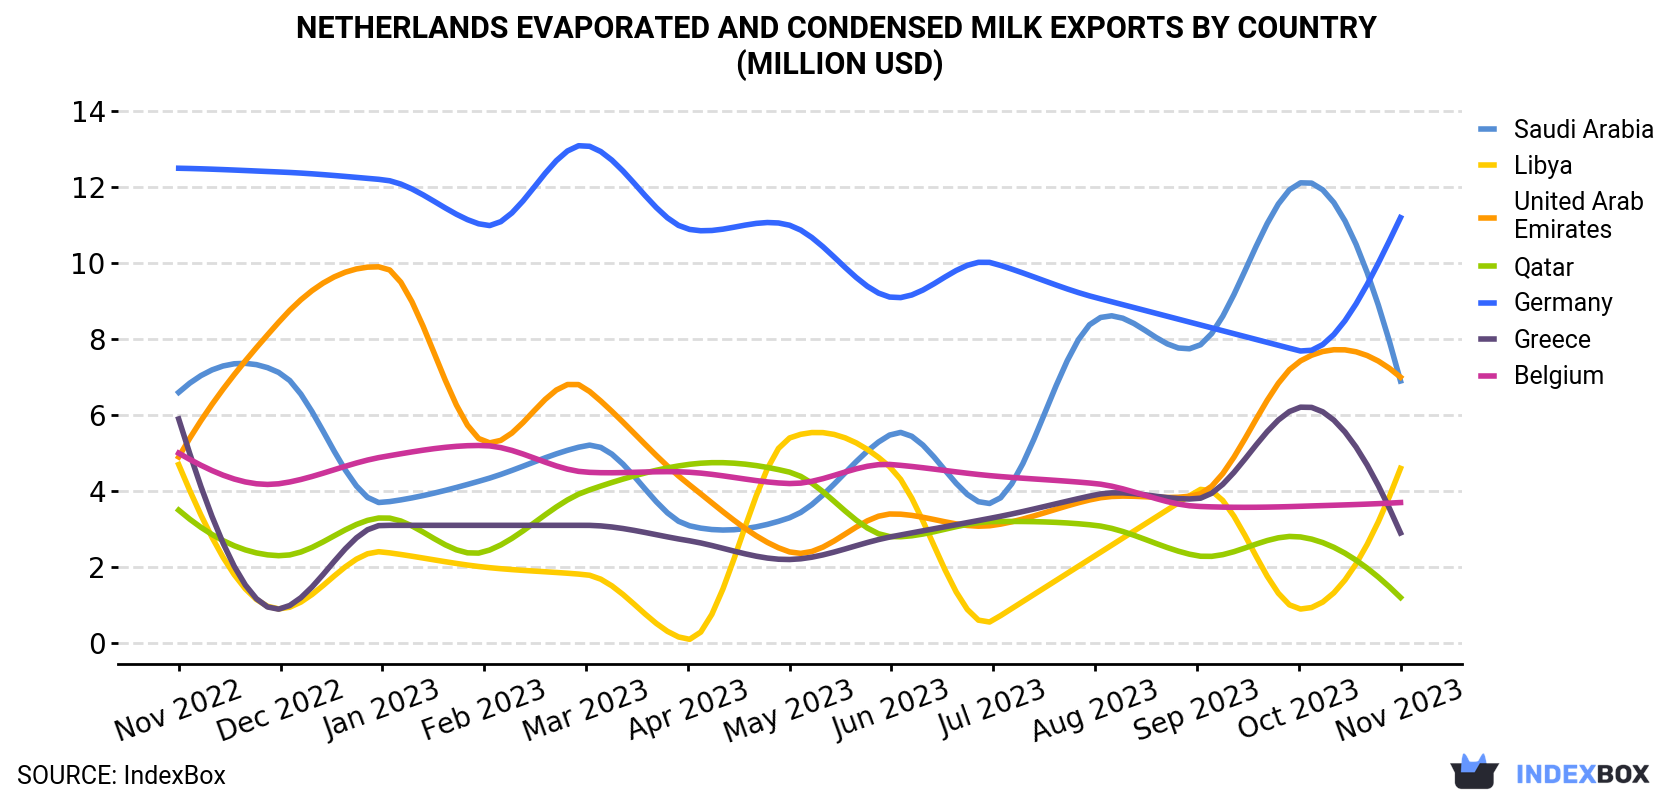 Netherlands Evaporated And Condensed Milk Exports By Country (Million USD)